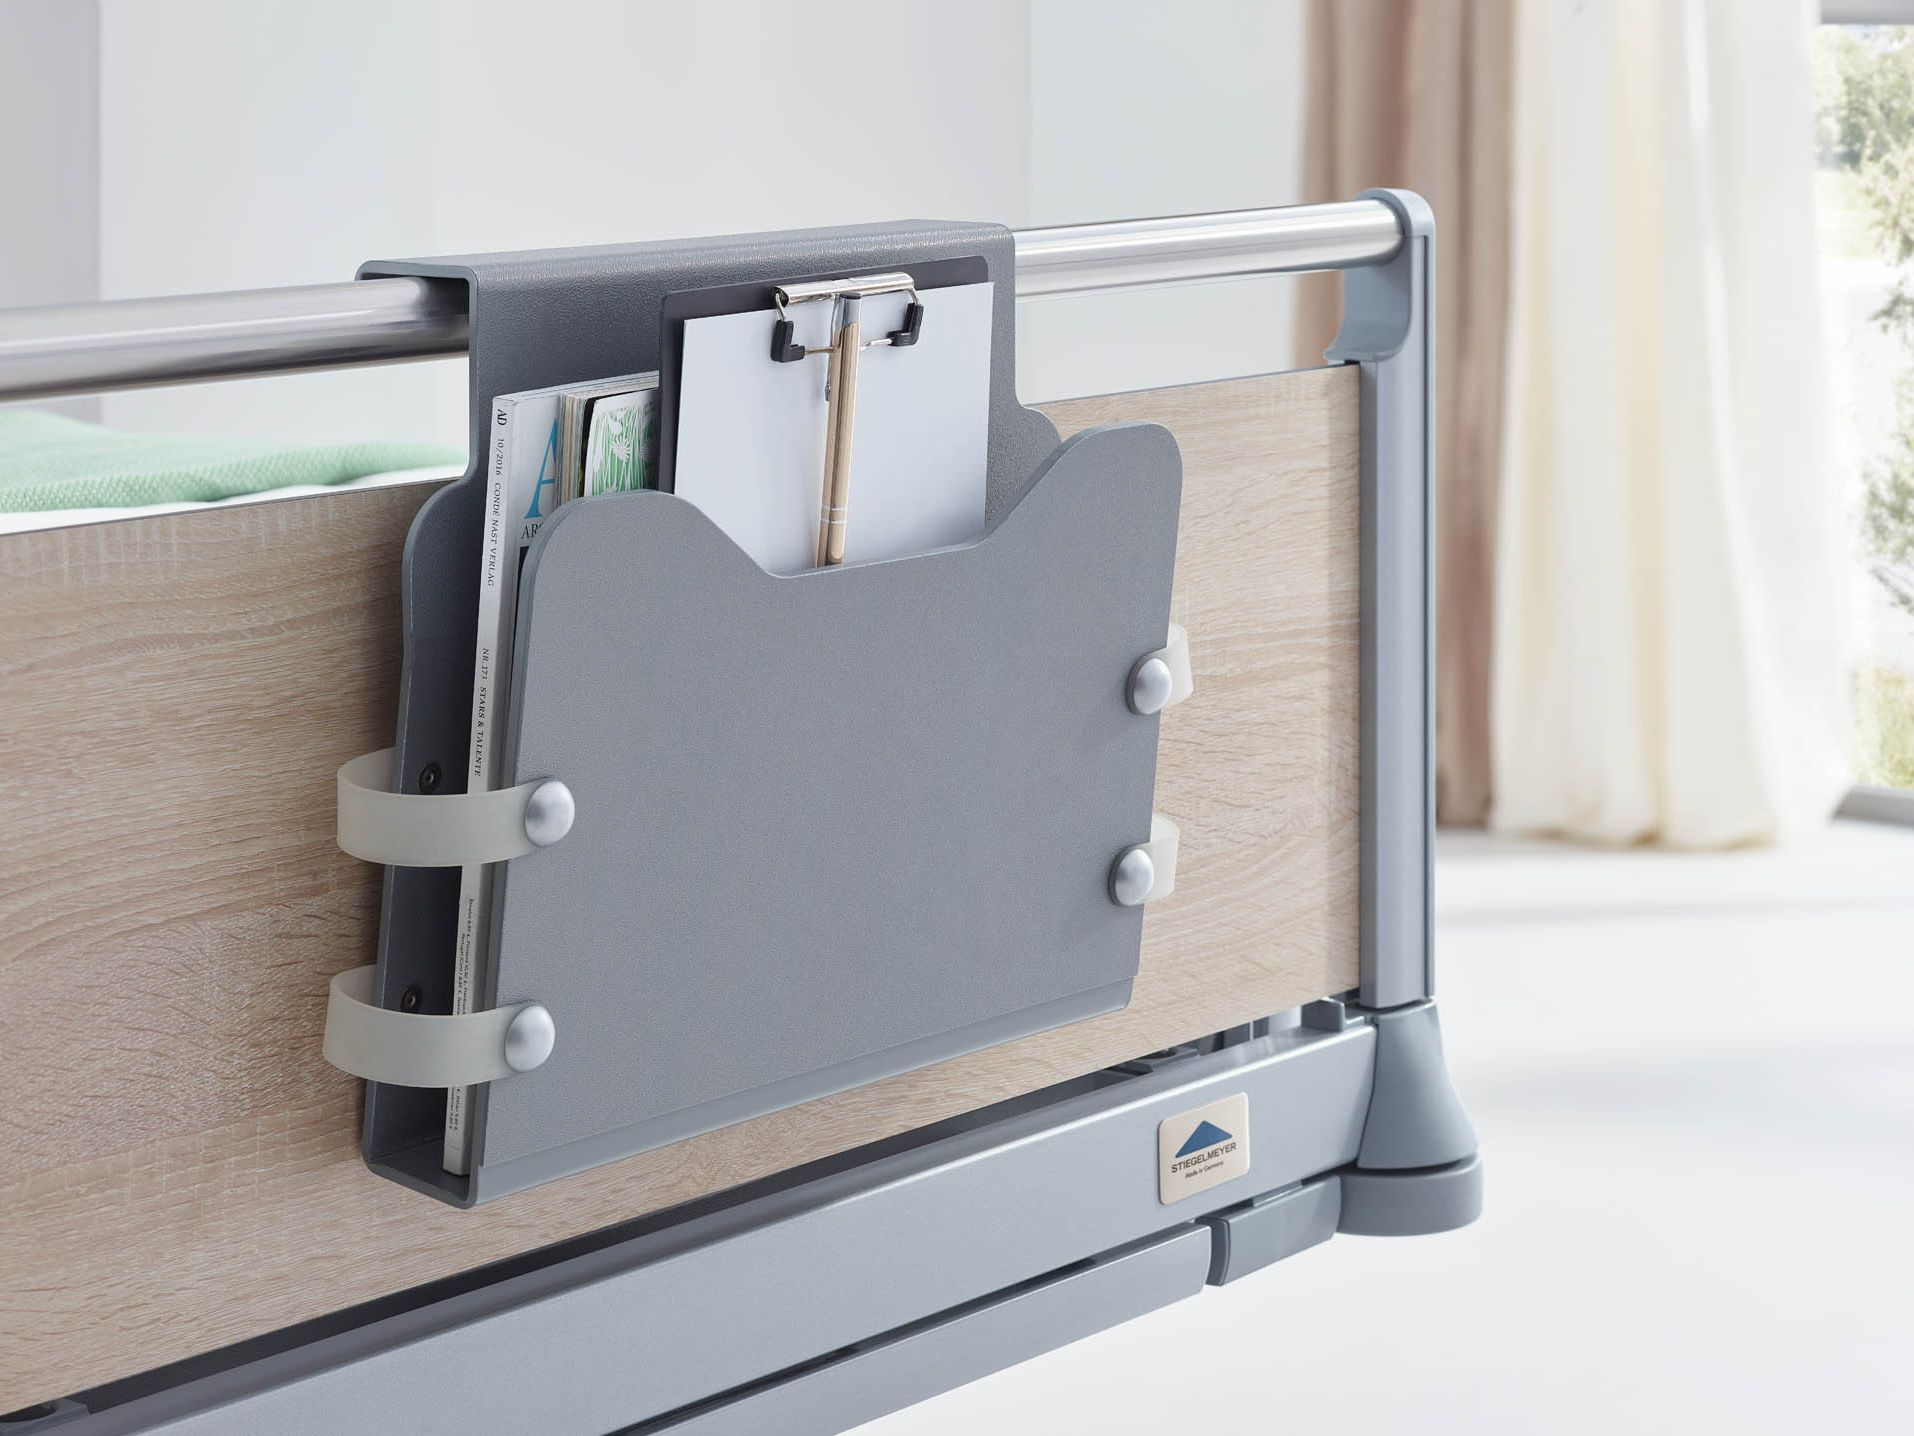 Document holders for different head and footboards